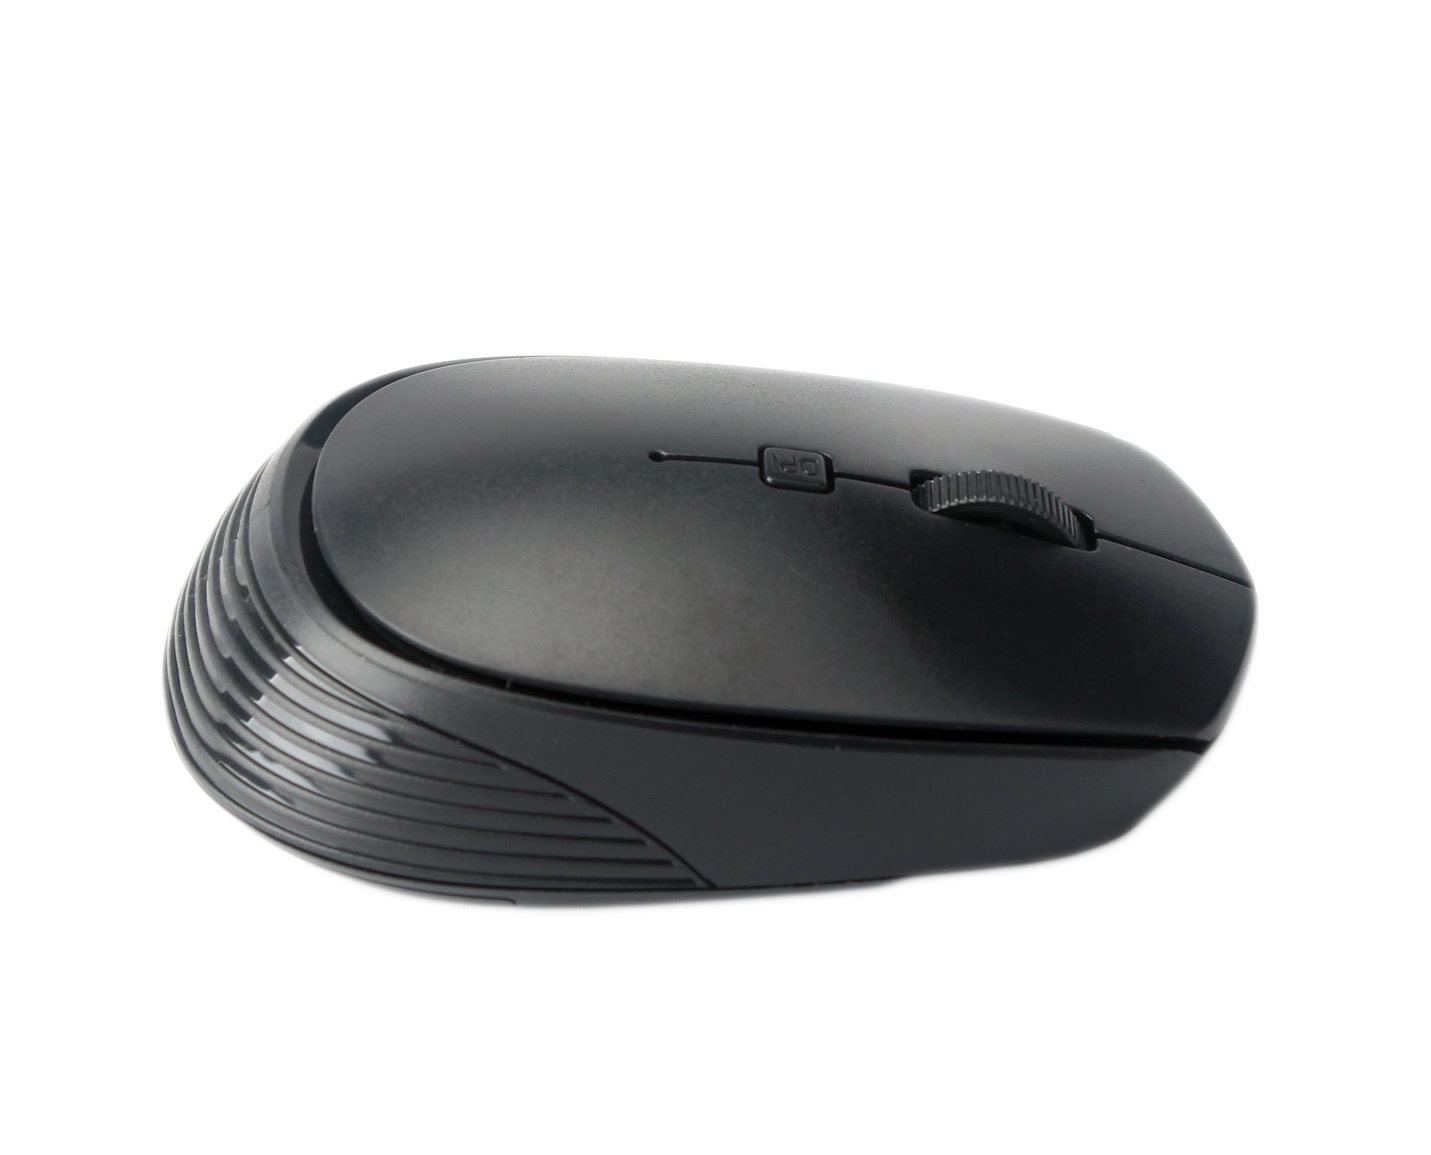 New Slim Wireless Mouse For Year 2020, 800/1200/1600 DPI